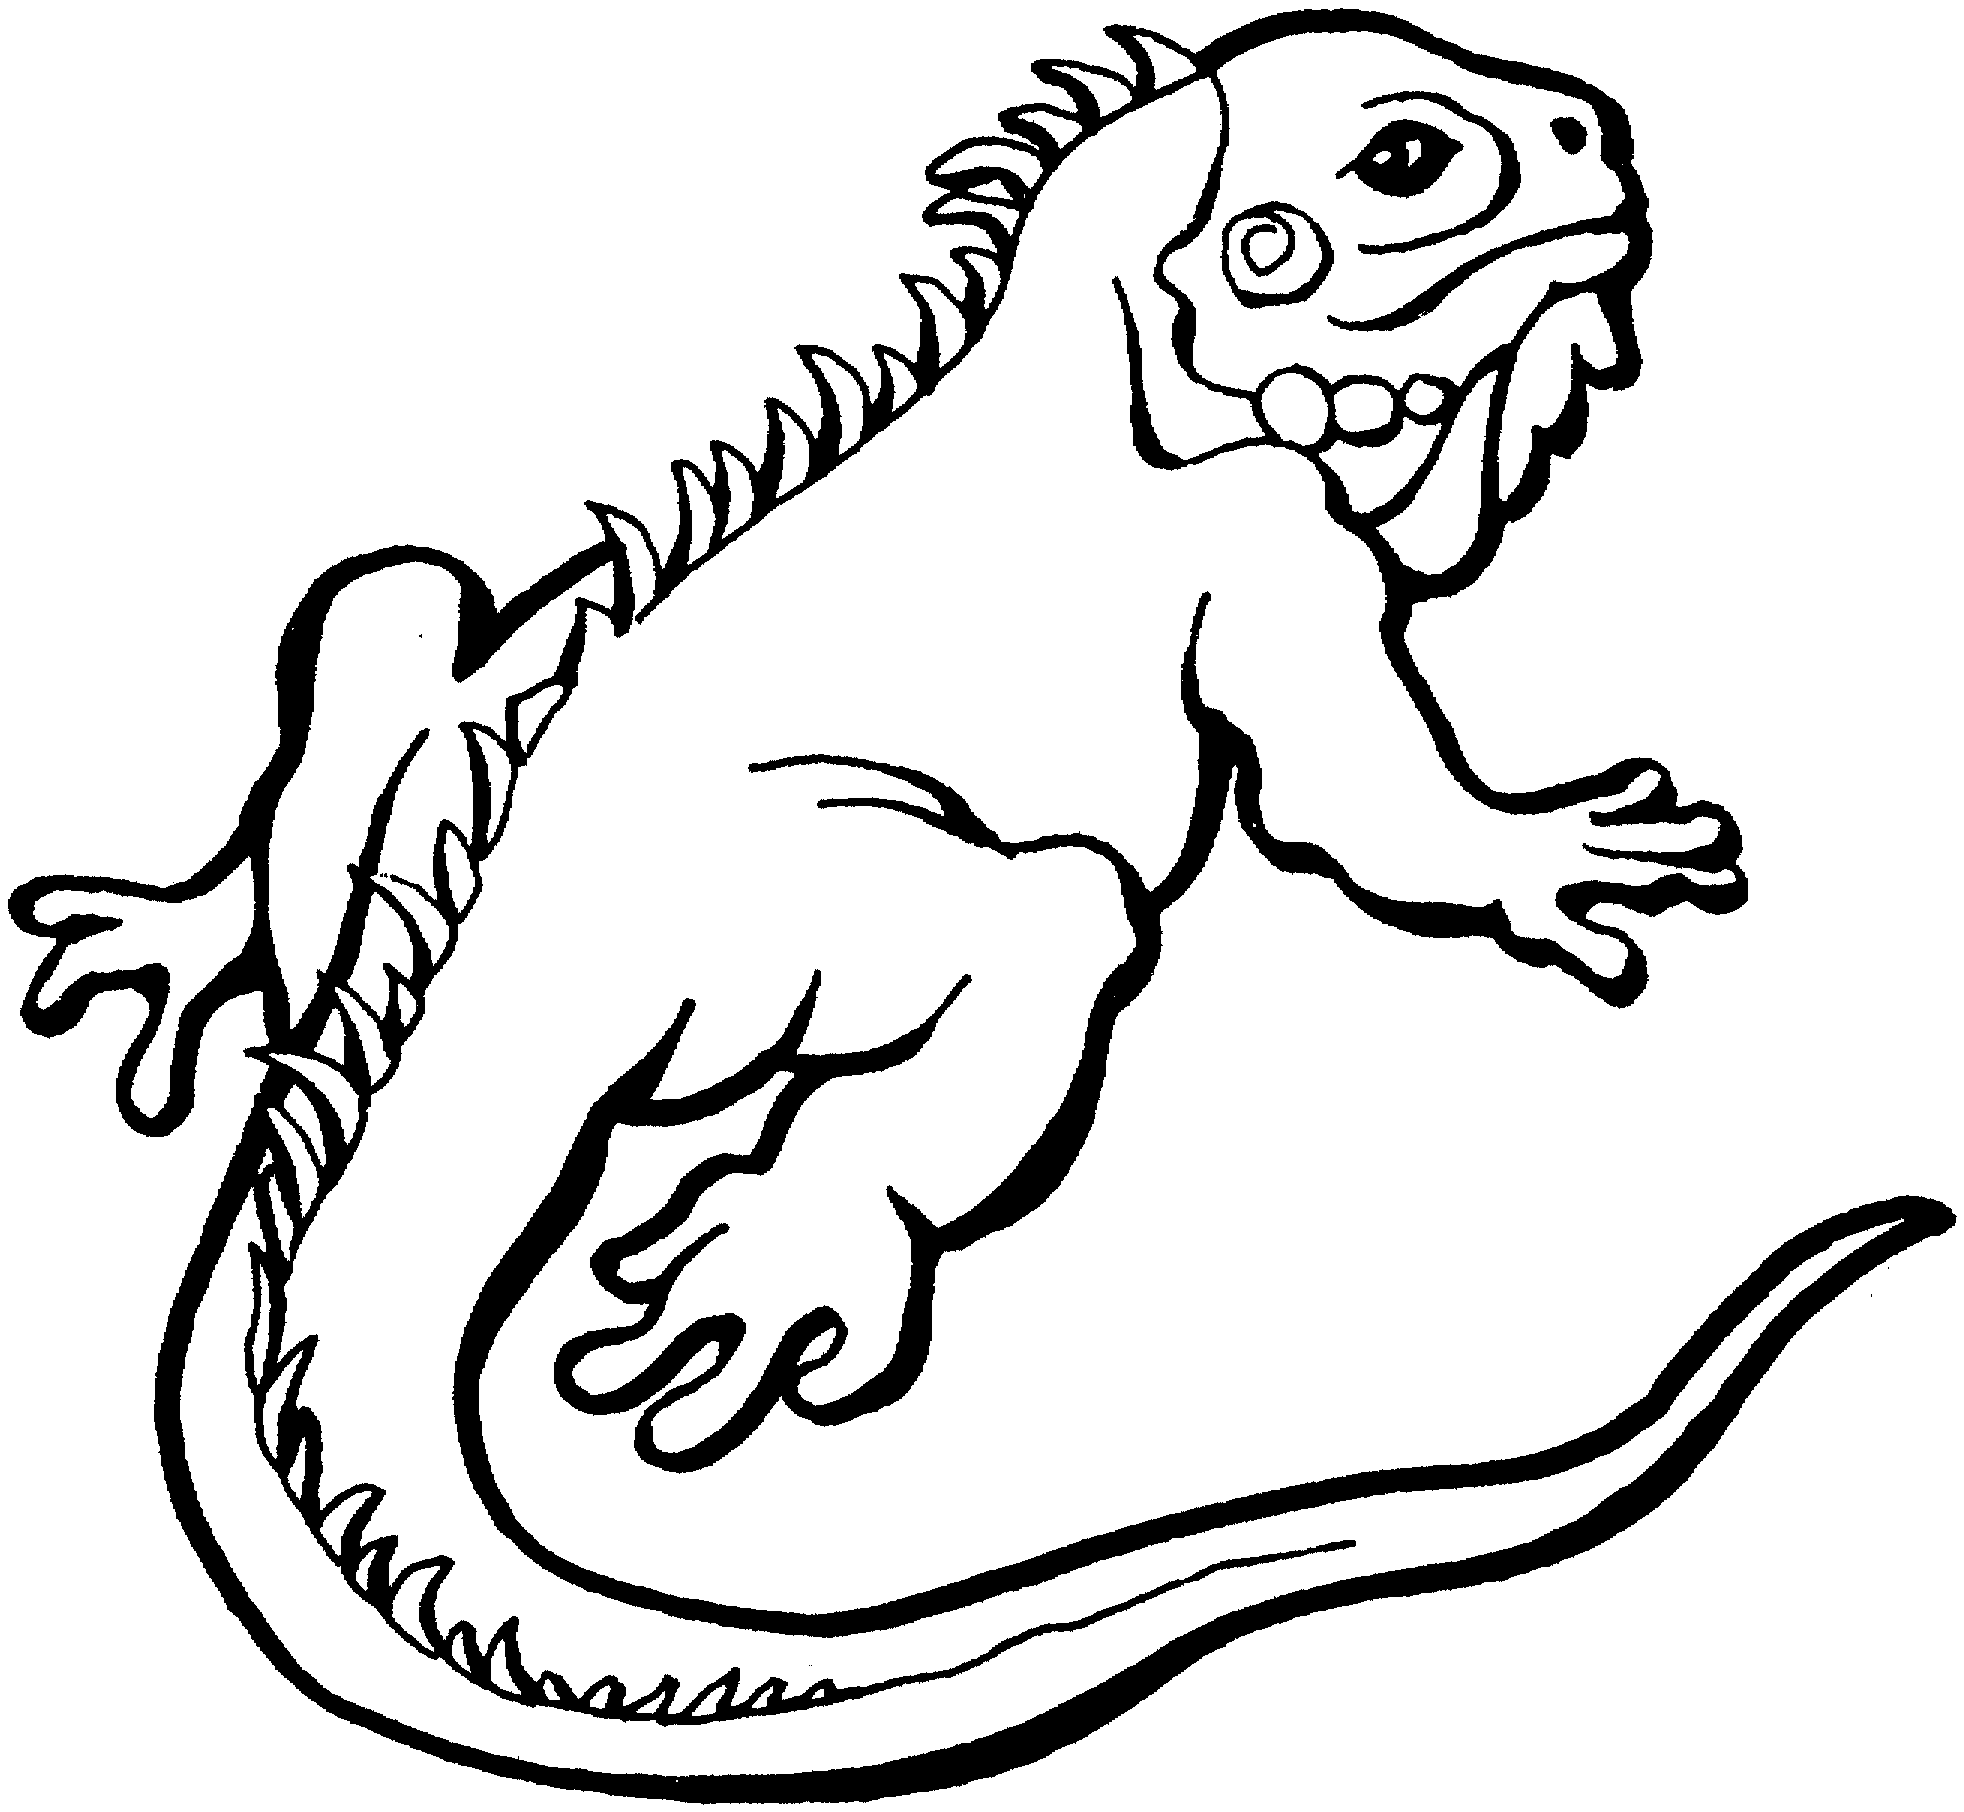 reptile-coloring-pages-best-coloring-pages-for-kids